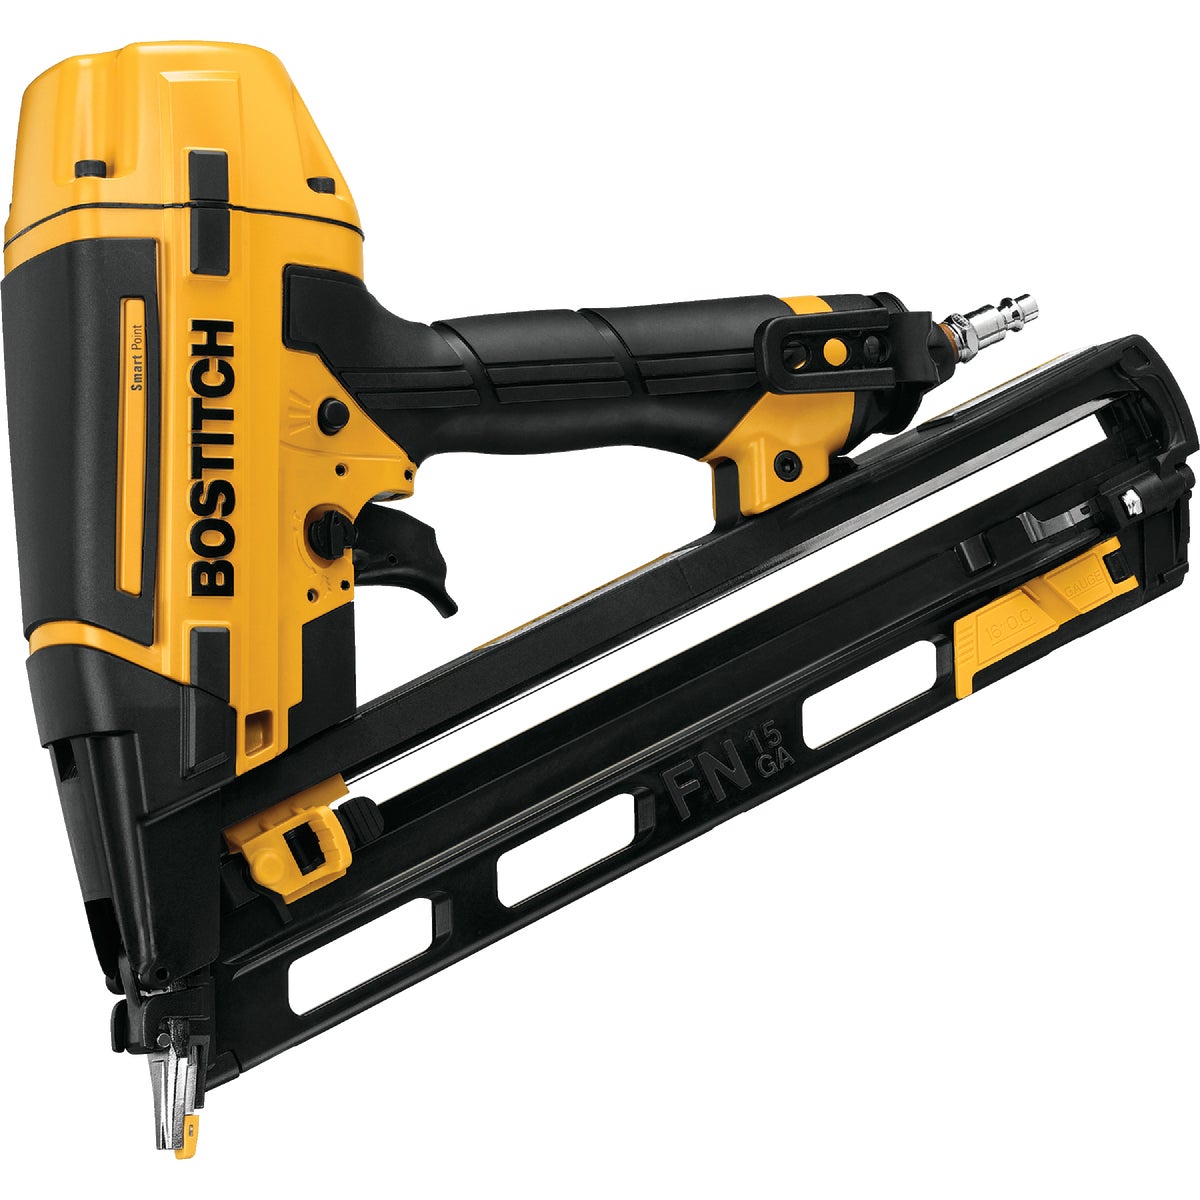 Bostitch Smart Point 15-Gauge 2-1/2 In. Angled Finish Nailer Kit